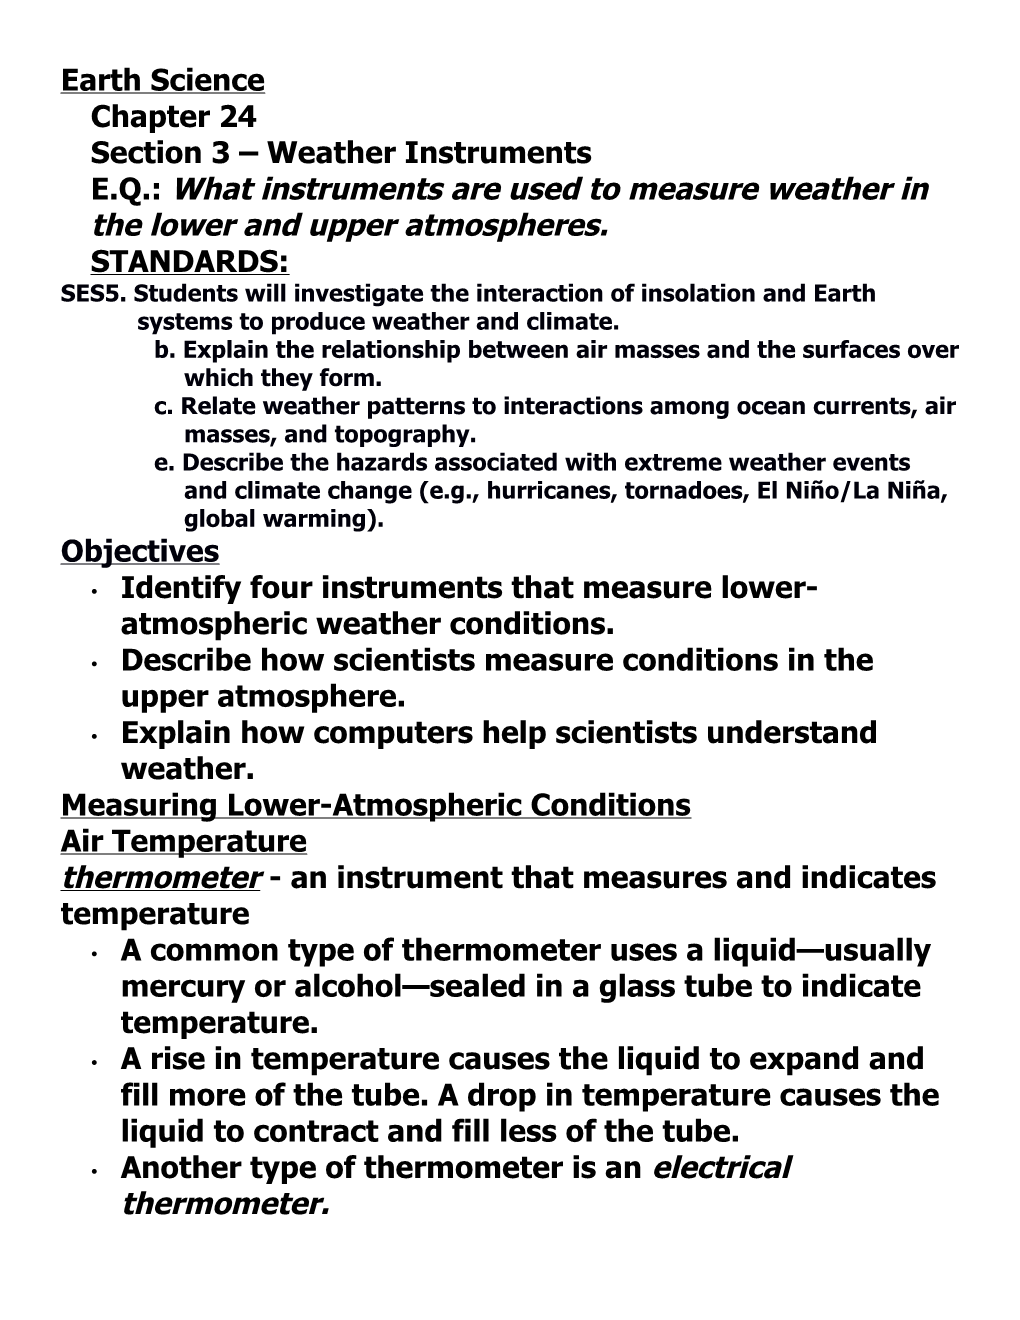 E.Q.: What Instruments Are Used to Measure Weather in the Lower and Upper Atmospheres